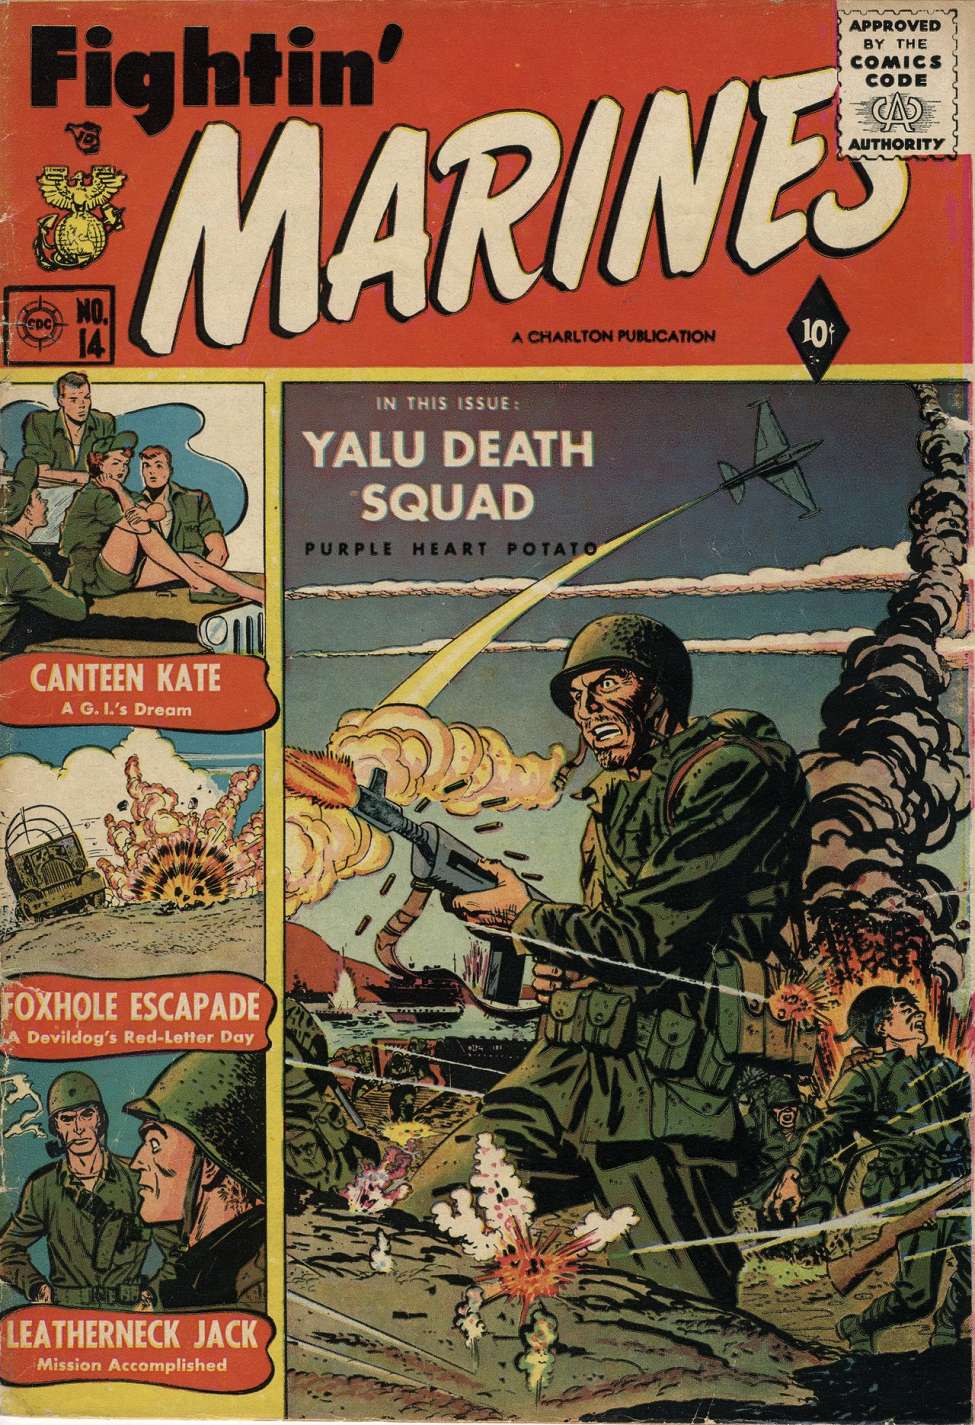 Book Cover For Fightin' Marines 14